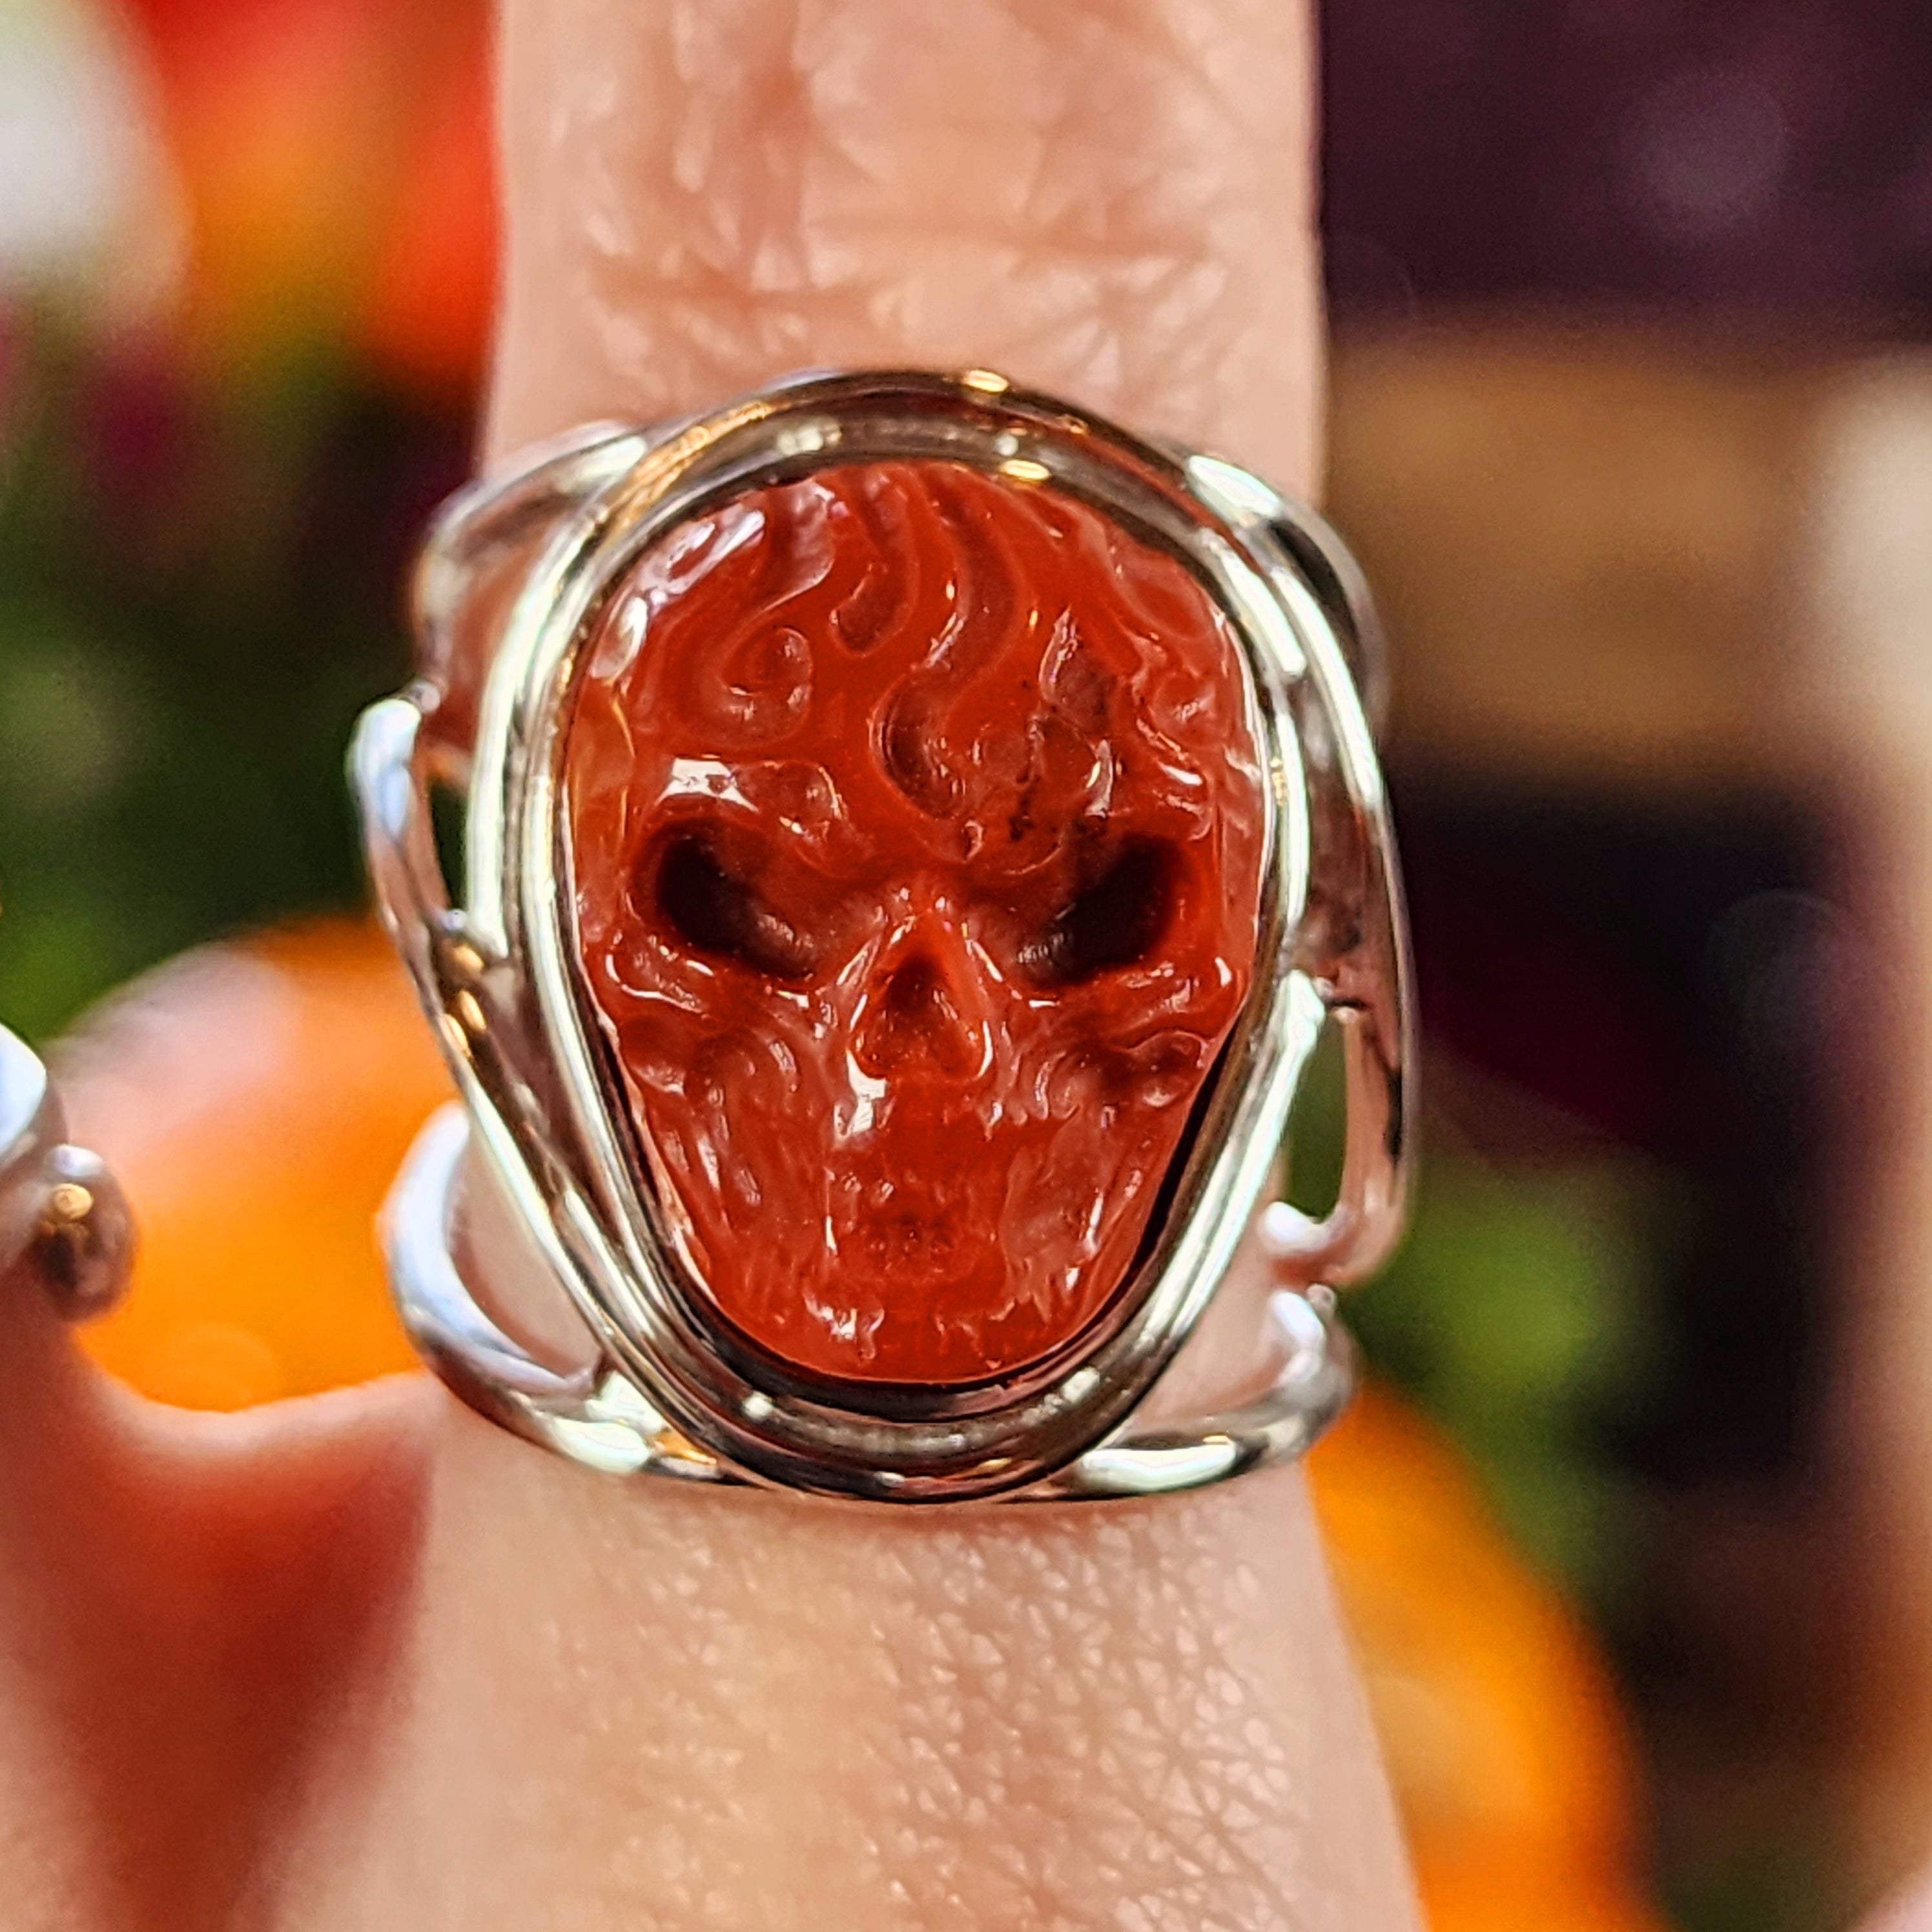 Carnelian Skull Finger Cuff Adjustable Ring .925 Silver for Personal Power